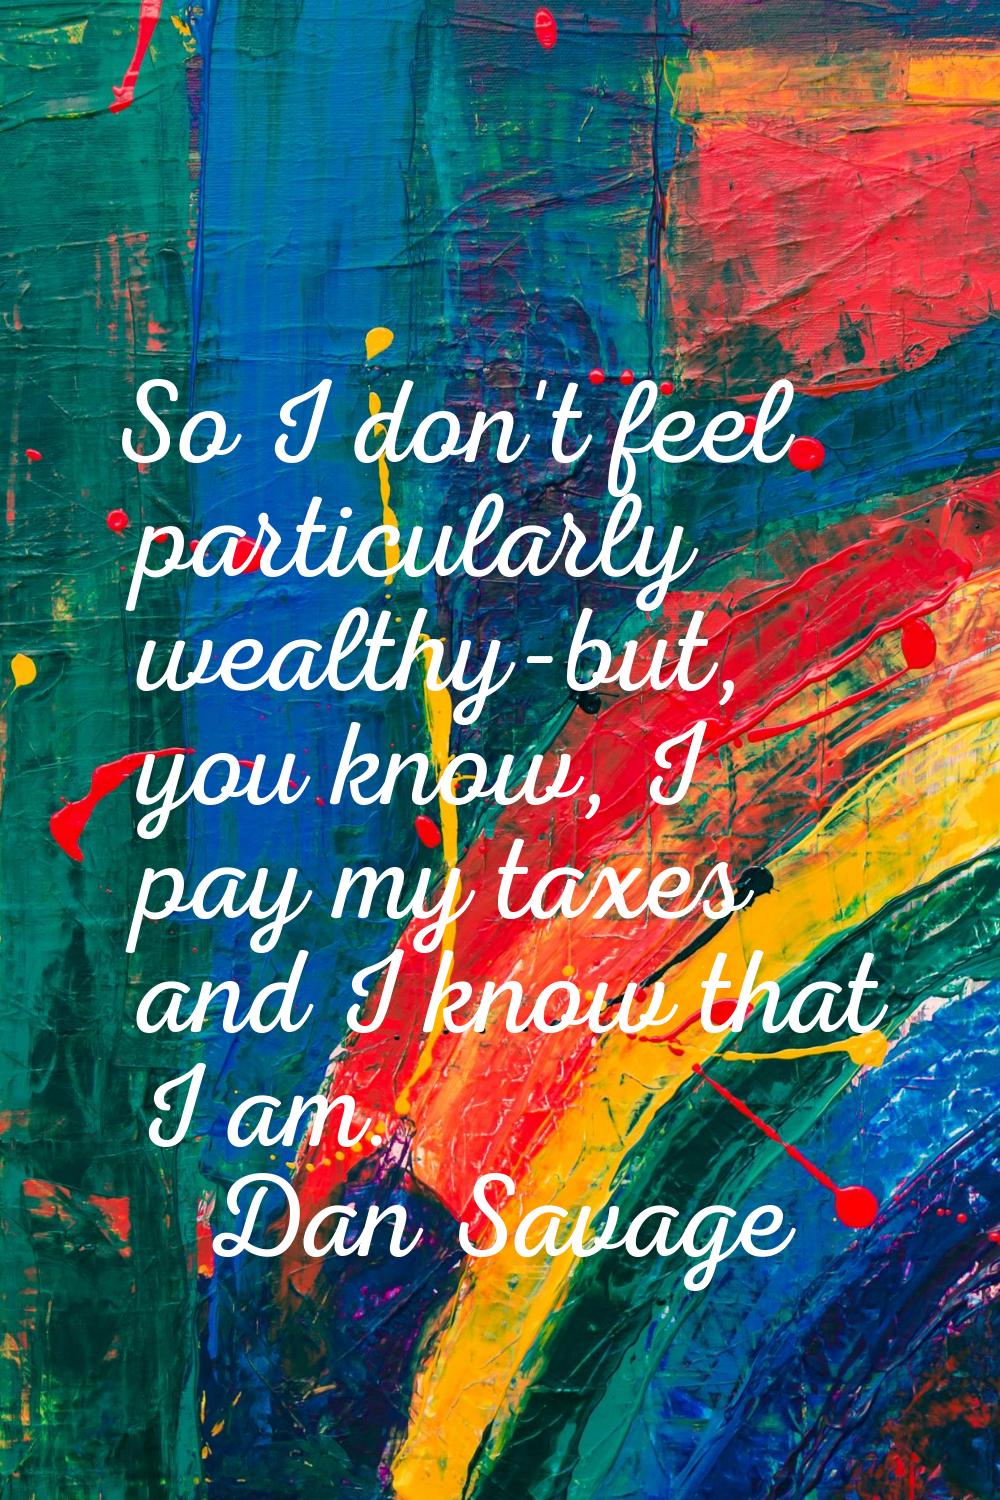 So I don't feel particularly wealthy-but, you know, I pay my taxes and I know that I am.